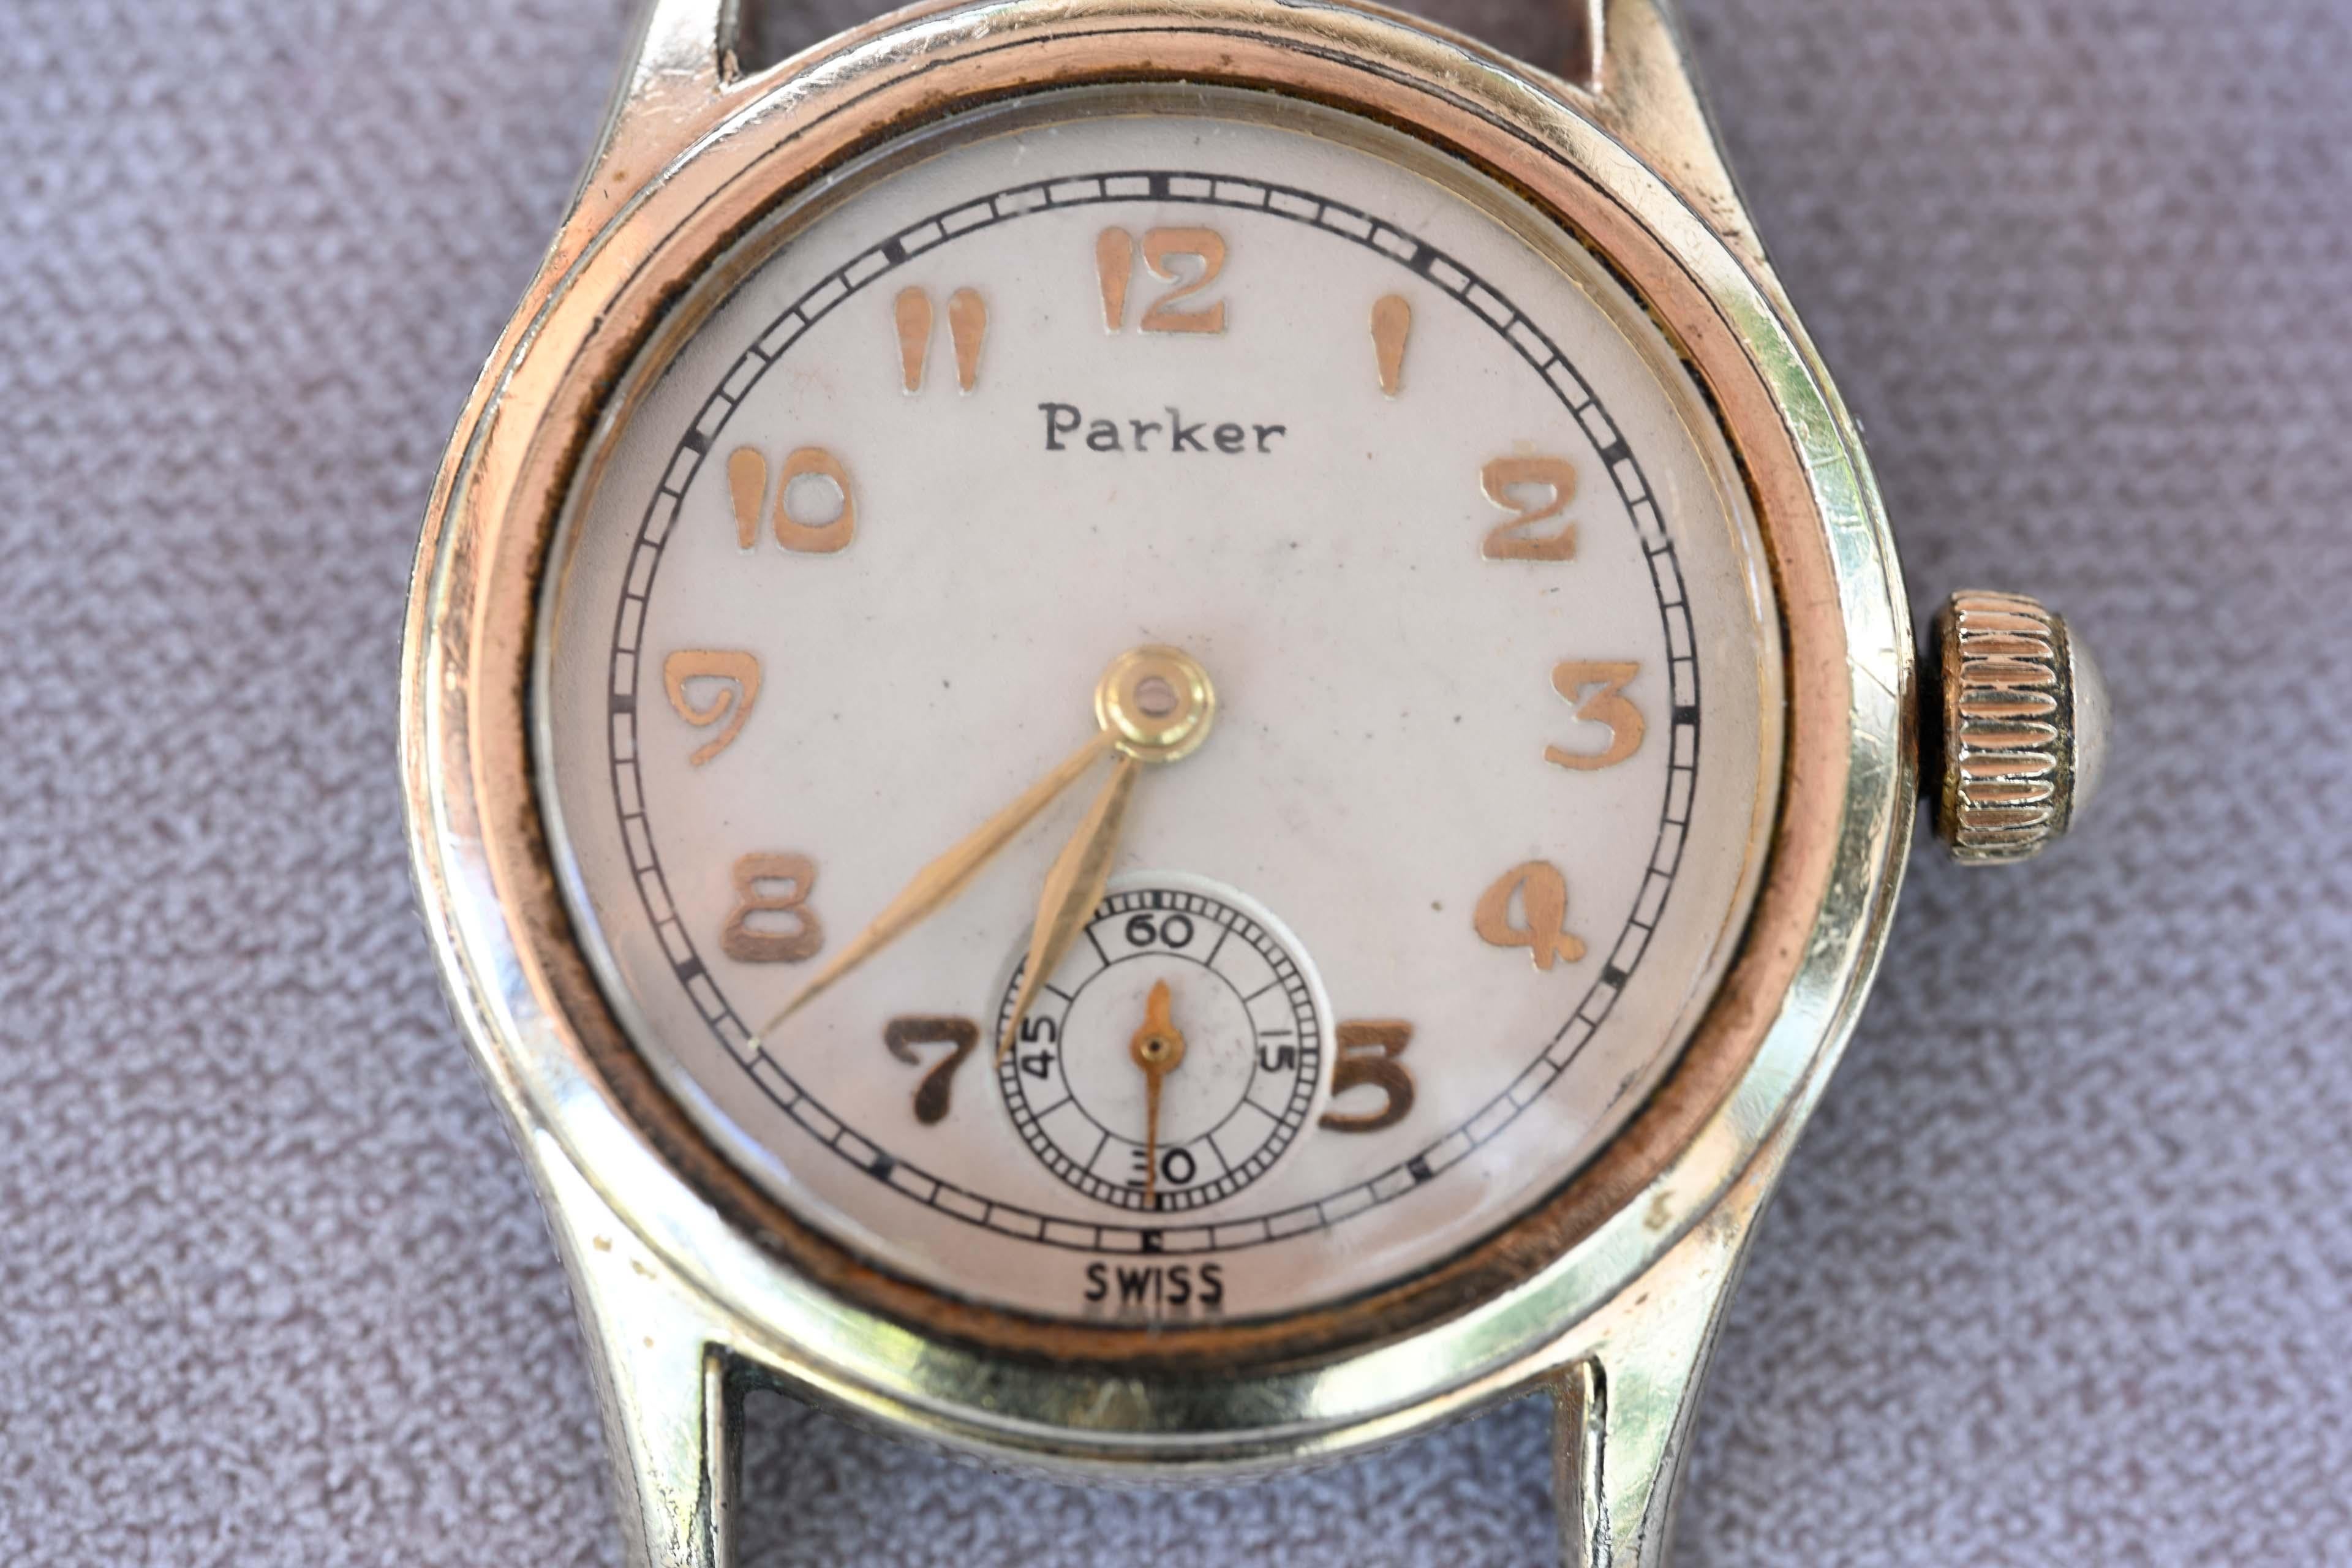 Parker military WW2 era watch with 7 jewels and mechanical movement. Swiss-made, #10A405. The case size is 29mm without the crown. In good working order, with dial and Roman numerals. Gold-tone harms, wear is consistent with age, no strap and no